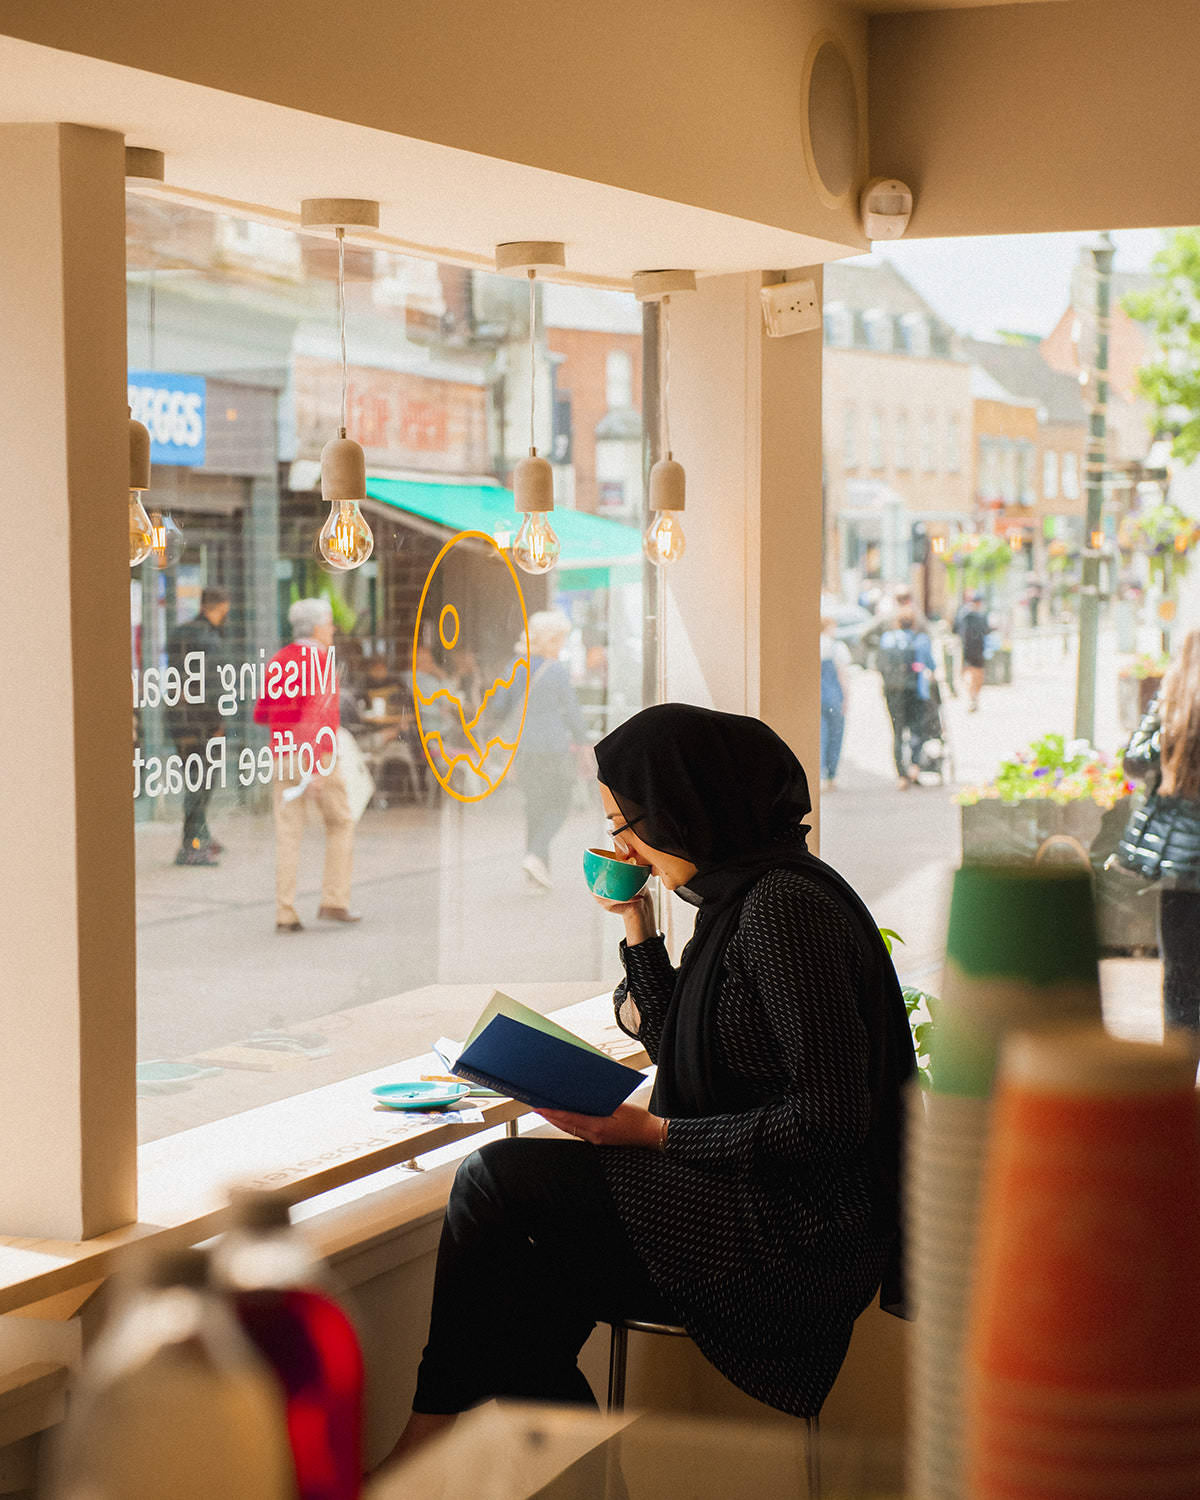 A customer enjoying a coffee and reading a book in the window of the Missing Bean cafe in Banbury